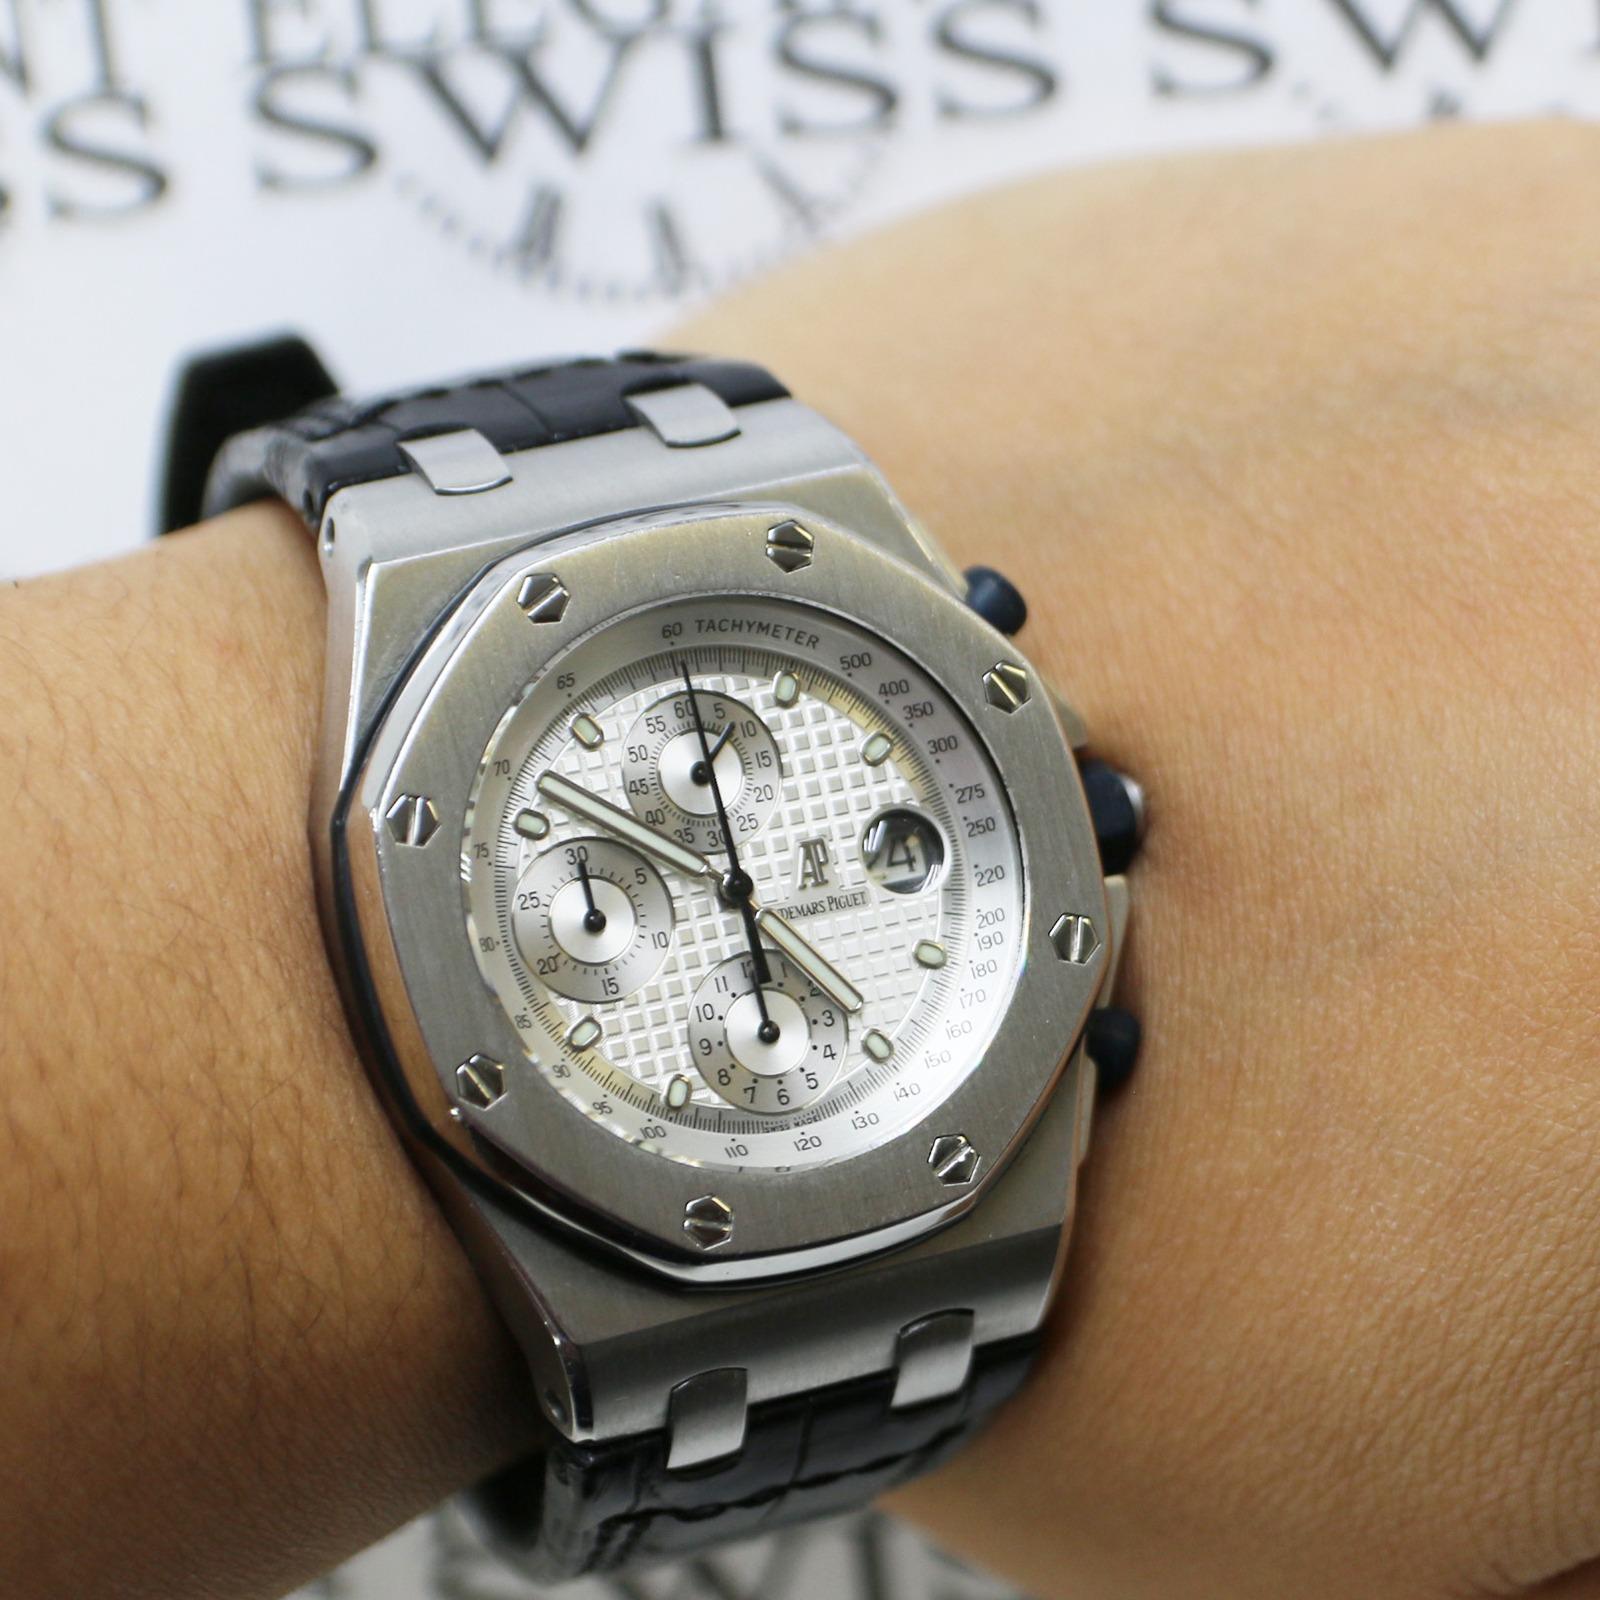 Audemars Piguet Royal Oak Offshore Chronograph Watch. Self-winding automatic movement. Stainless steel case of 42mm in diameter. Steel bezel. Scratch-resistant sapphire crystal. Silver-toned dial with “Grande Tapisserie” pattern and three sub-dials.